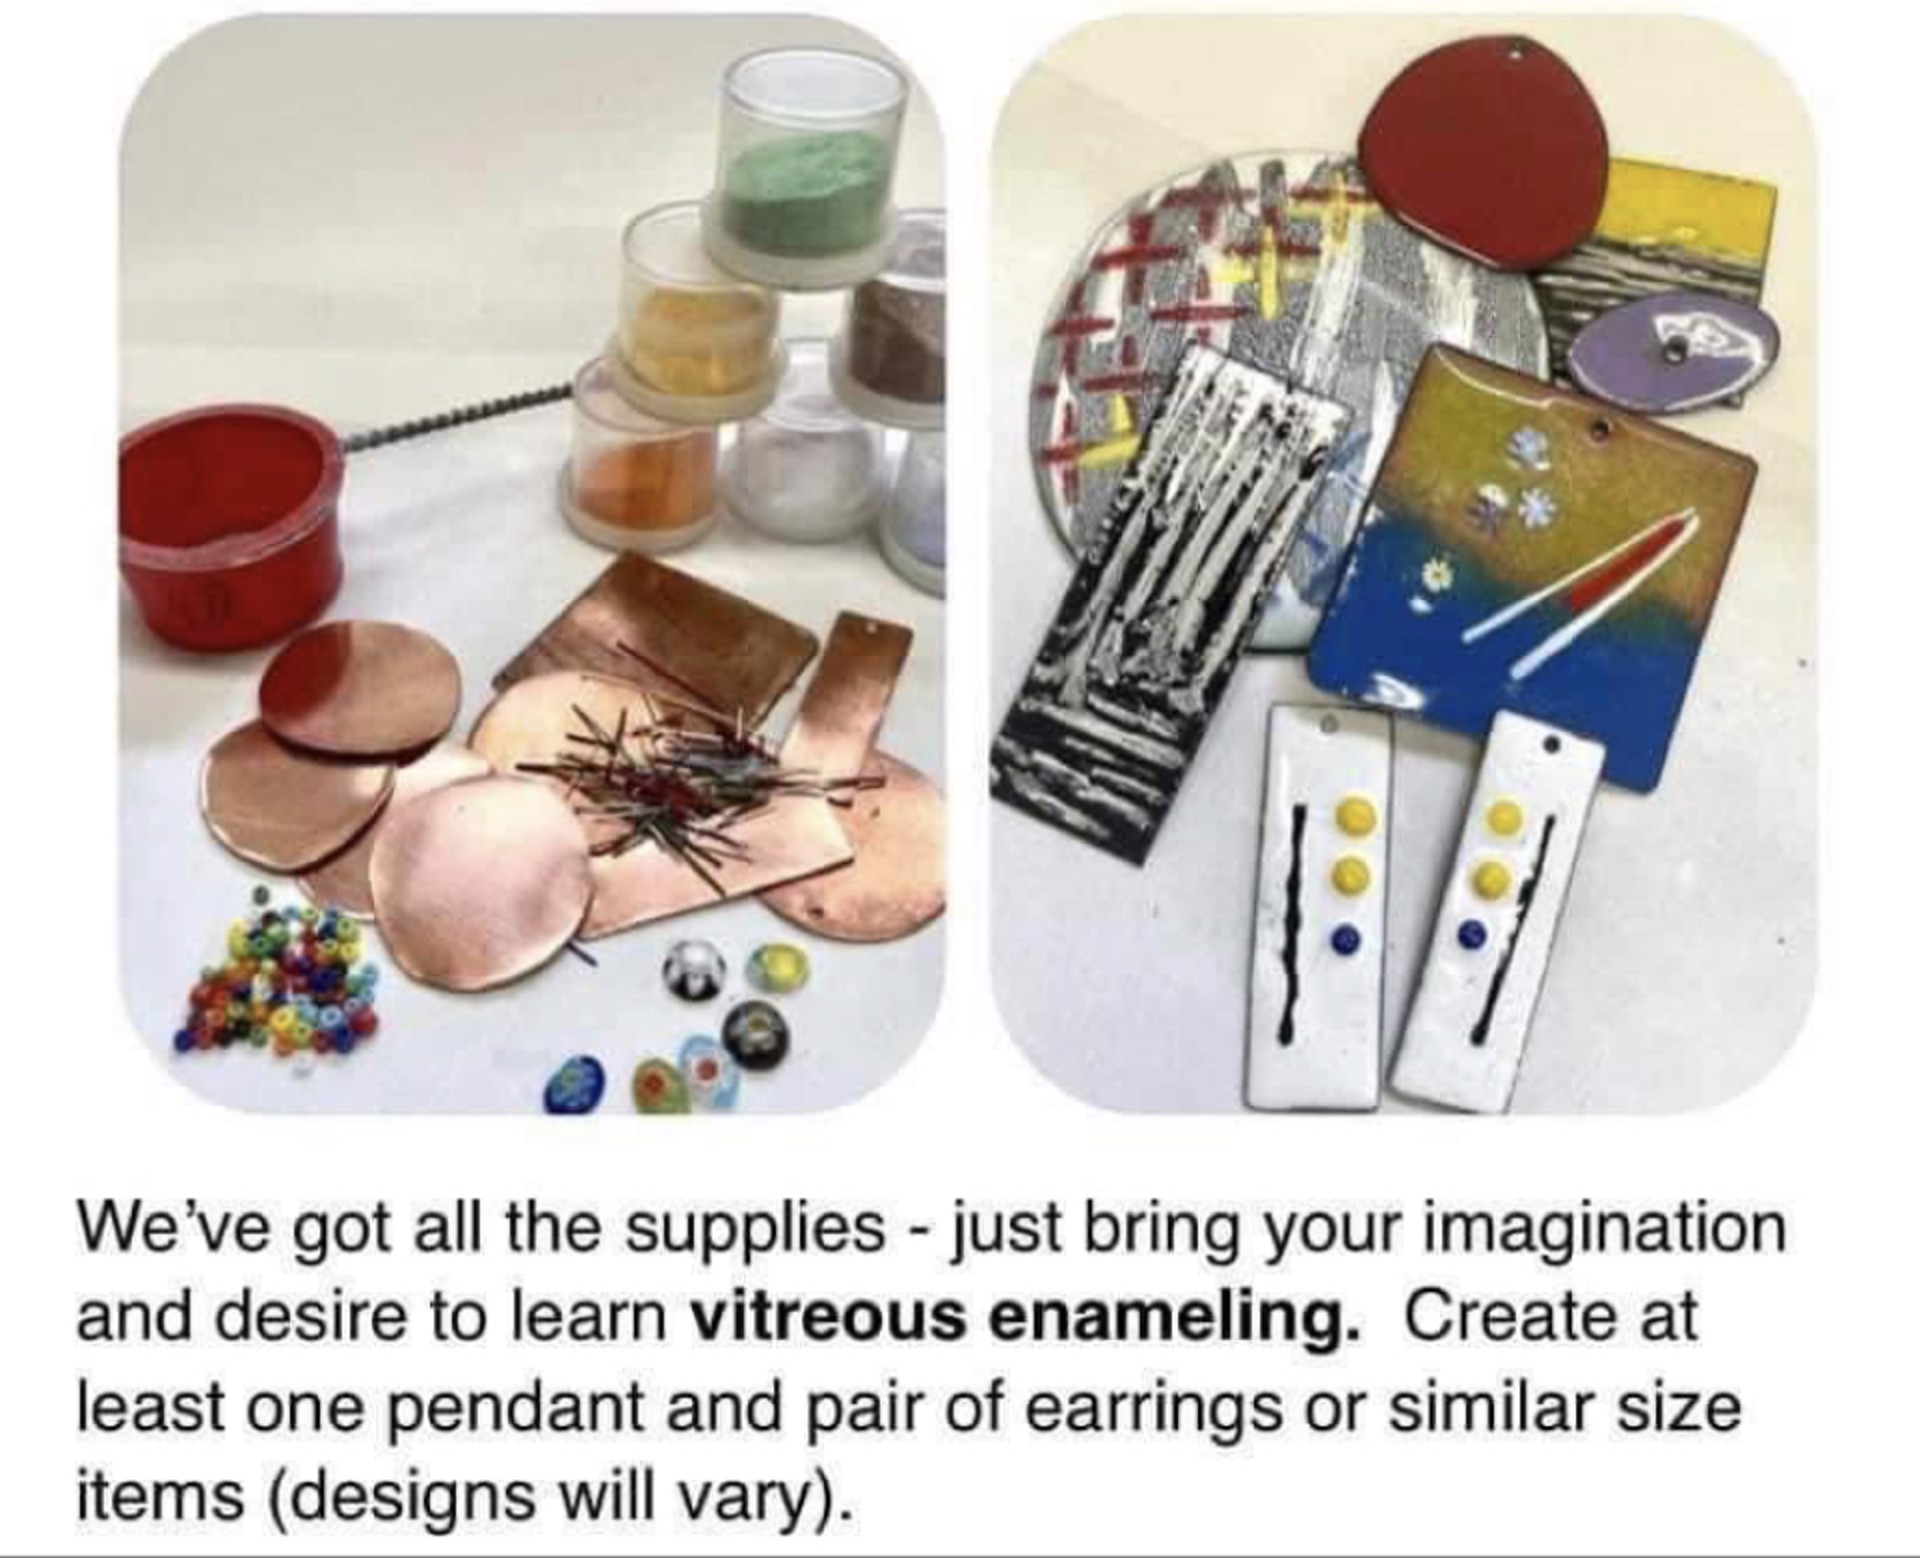 Vitreous Enameling Workshop 1-4 PM by Cathy Talbot